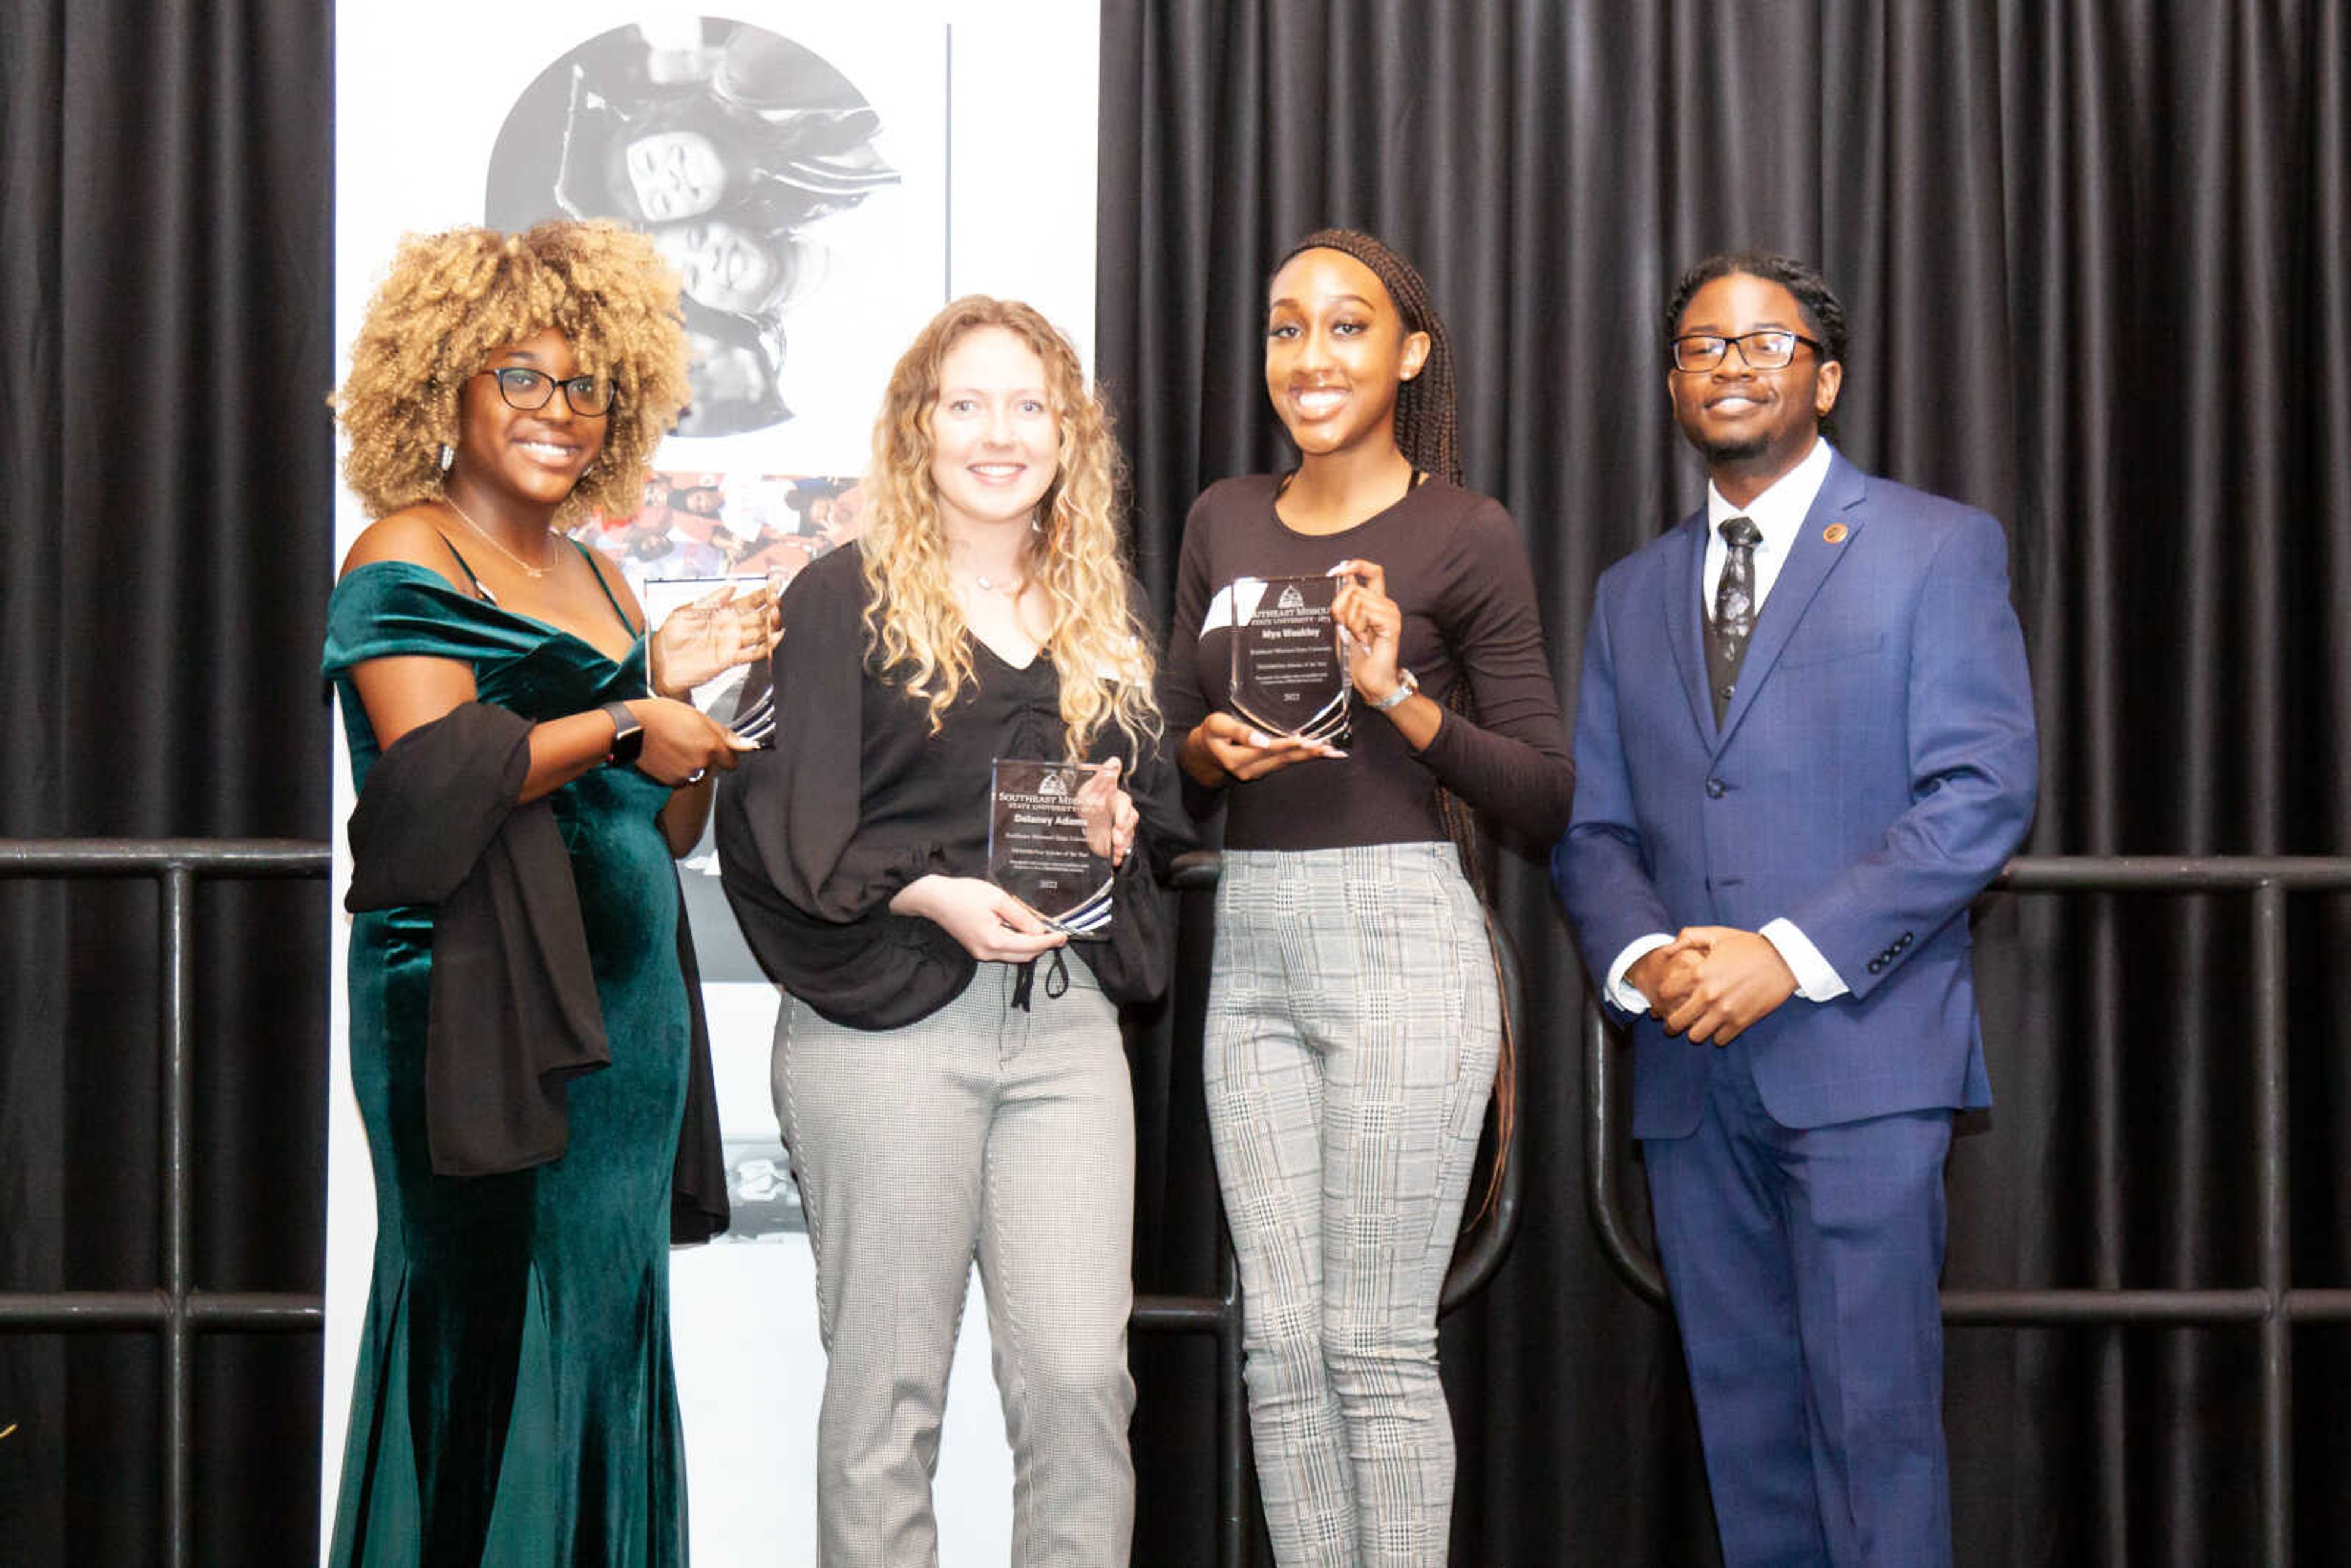 Pictured from left to right is Camille Shoals, Delaney Adams, Mya Weakley and Wendell Stapleton, Academic Coordinator of the McNair Scholars Program.
